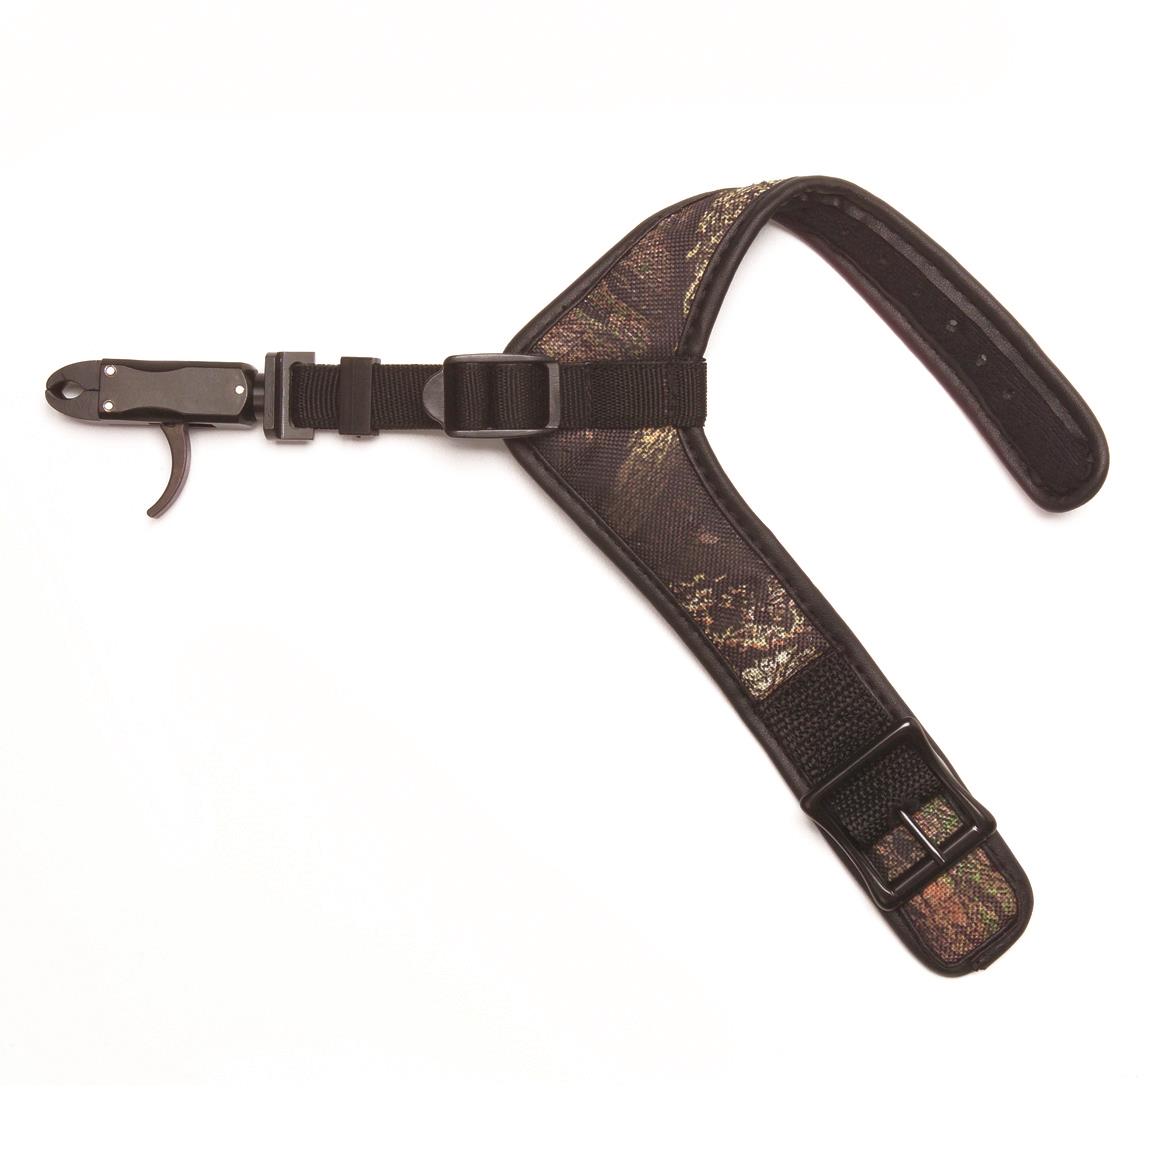 30-06 Outdoors Mustang Compact Wrist Strap Bow Release